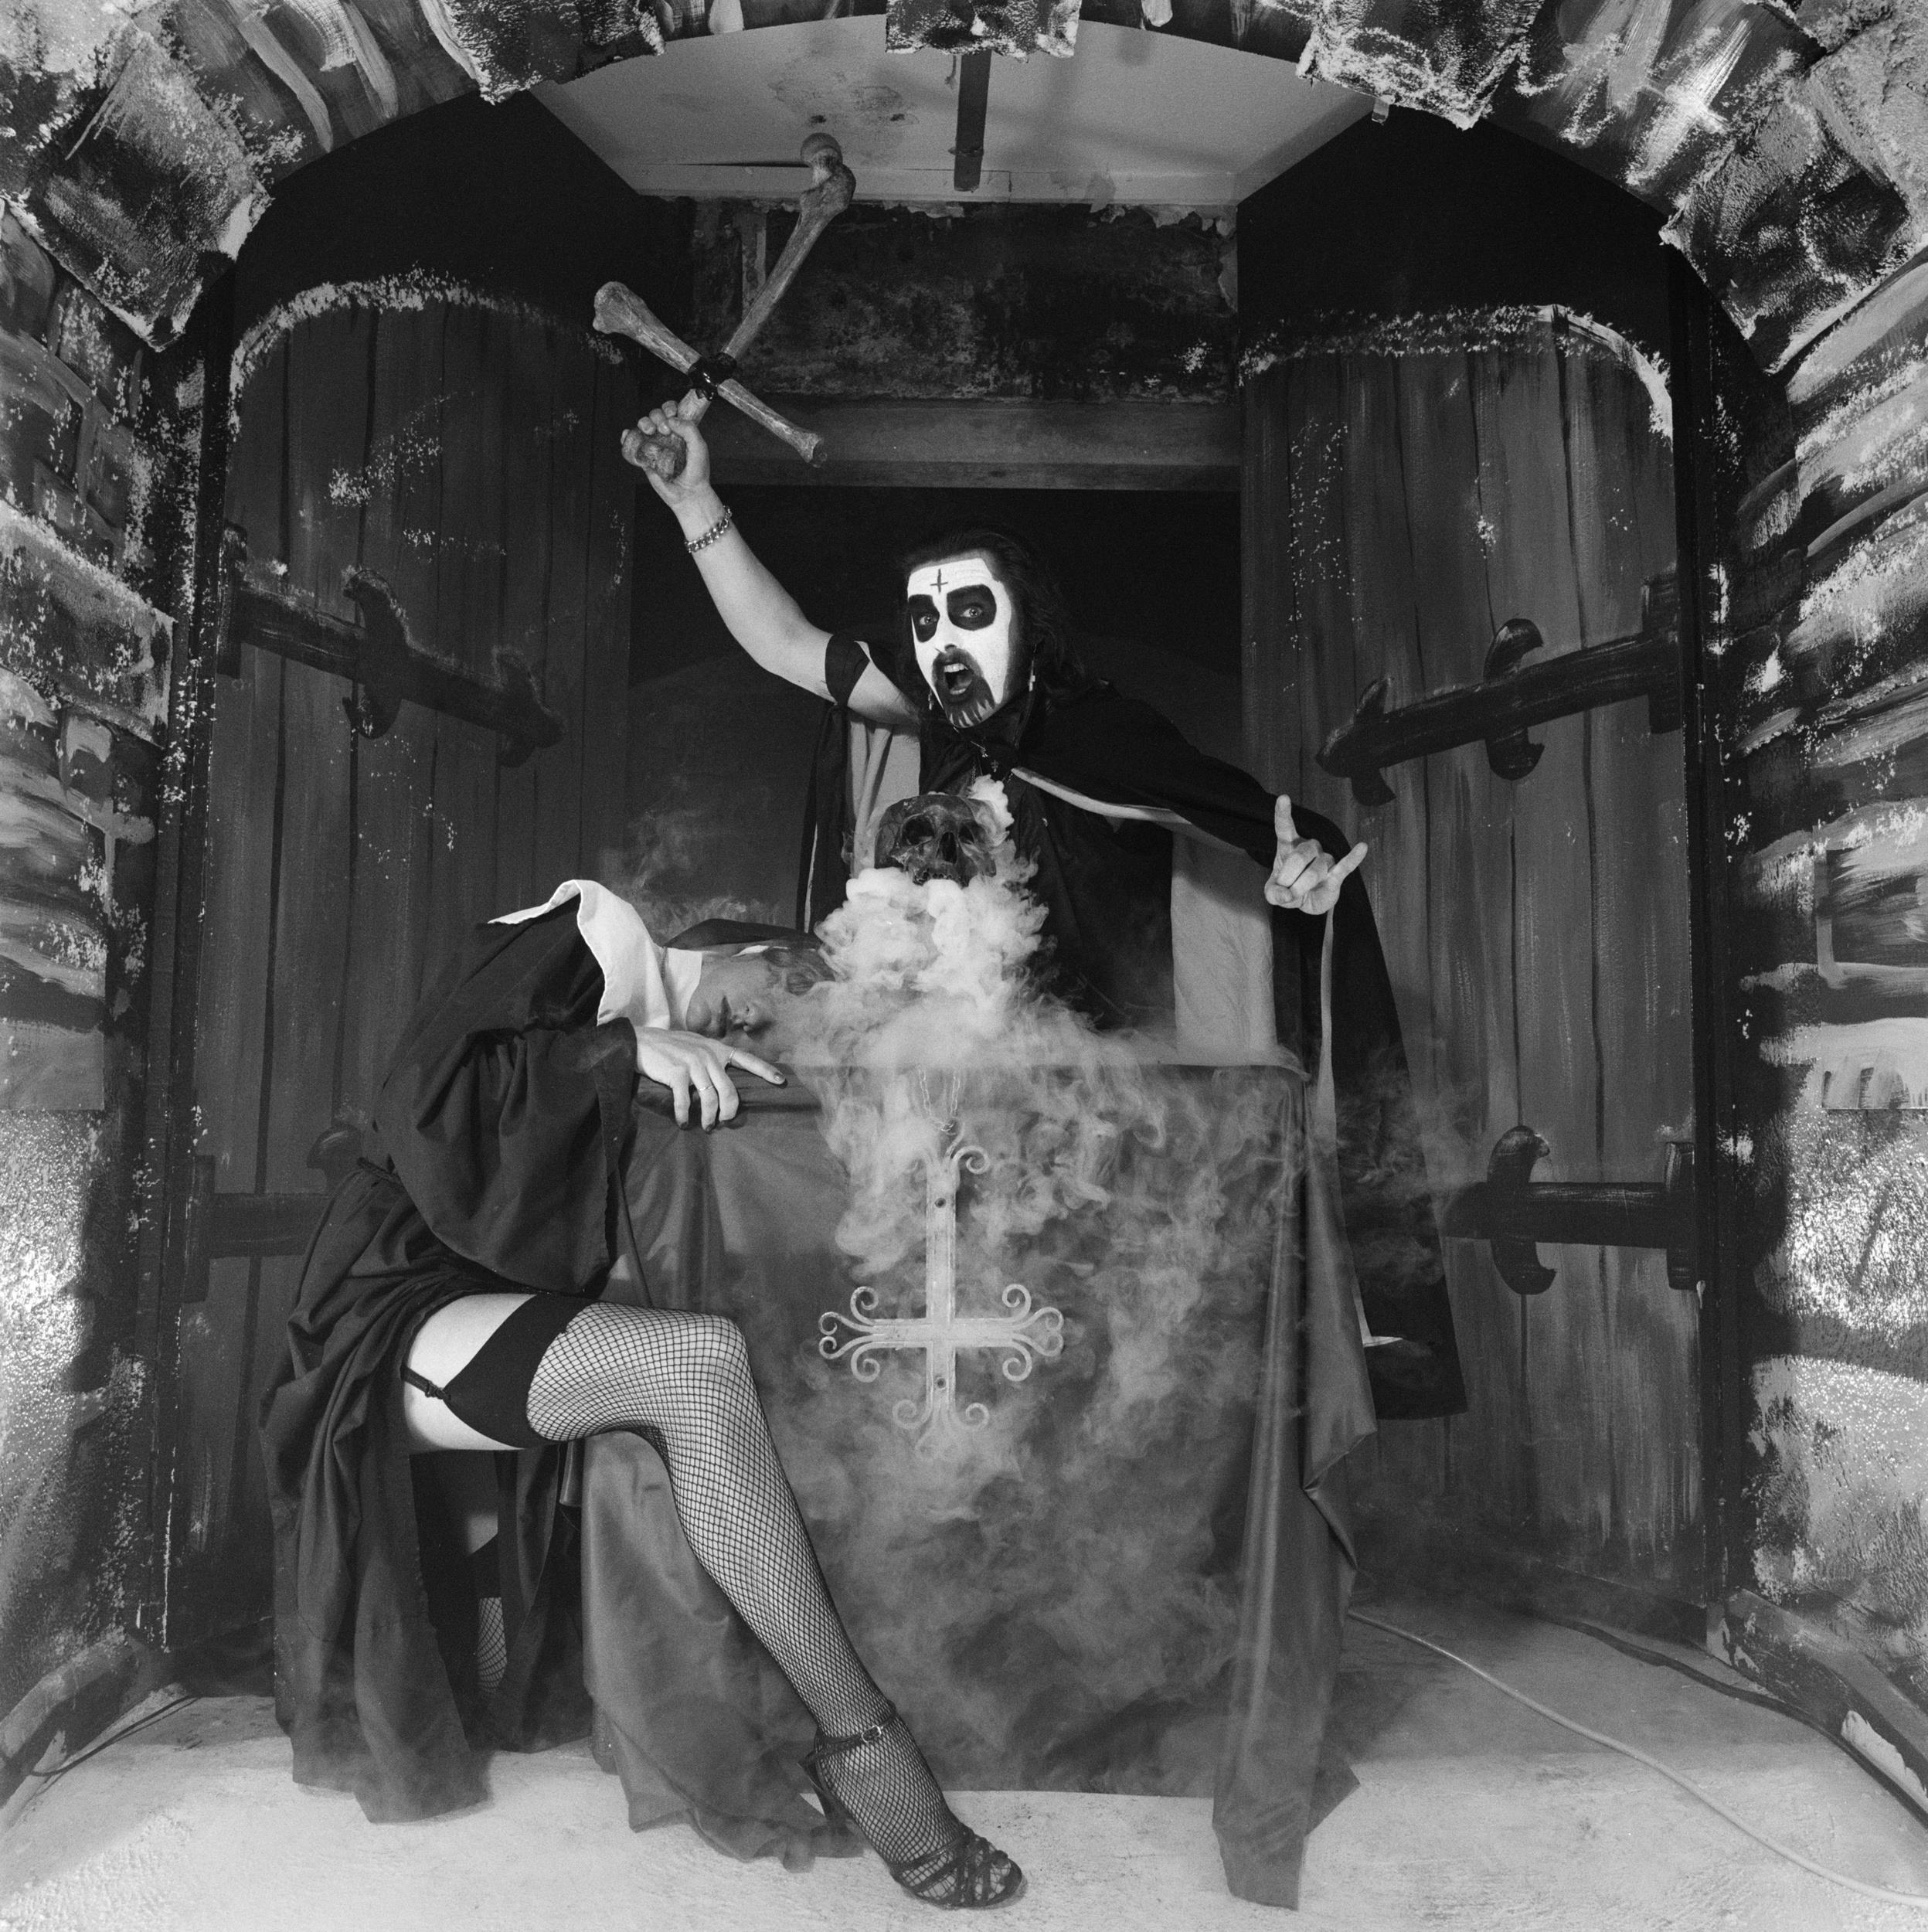 <p>In 1992, everyone's favorite Danish heavy metal band reunited! Mercyful Fate's 1993 album, <em>In the Shadows</em> was well-regarded, and 1994's <em>Time</em> continued that tradition. The album was another 47 minutes of horror-themed metal (heavy of the H.P. Lovecraft). The great thing about Mercyful Fate (and King Diamond) is that they are never afraid to be overly theatric, even if that makes them seem a little silly.</p><p><a href='https://www.msn.com/en-us/community/channel/vid-cj9pqbr0vn9in2b6ddcd8sfgpfq6x6utp44fssrv6mc2gtybw0us'>Did you enjoy this slideshow? Follow us on MSN to see more of our exclusive entertainment content.</a></p>